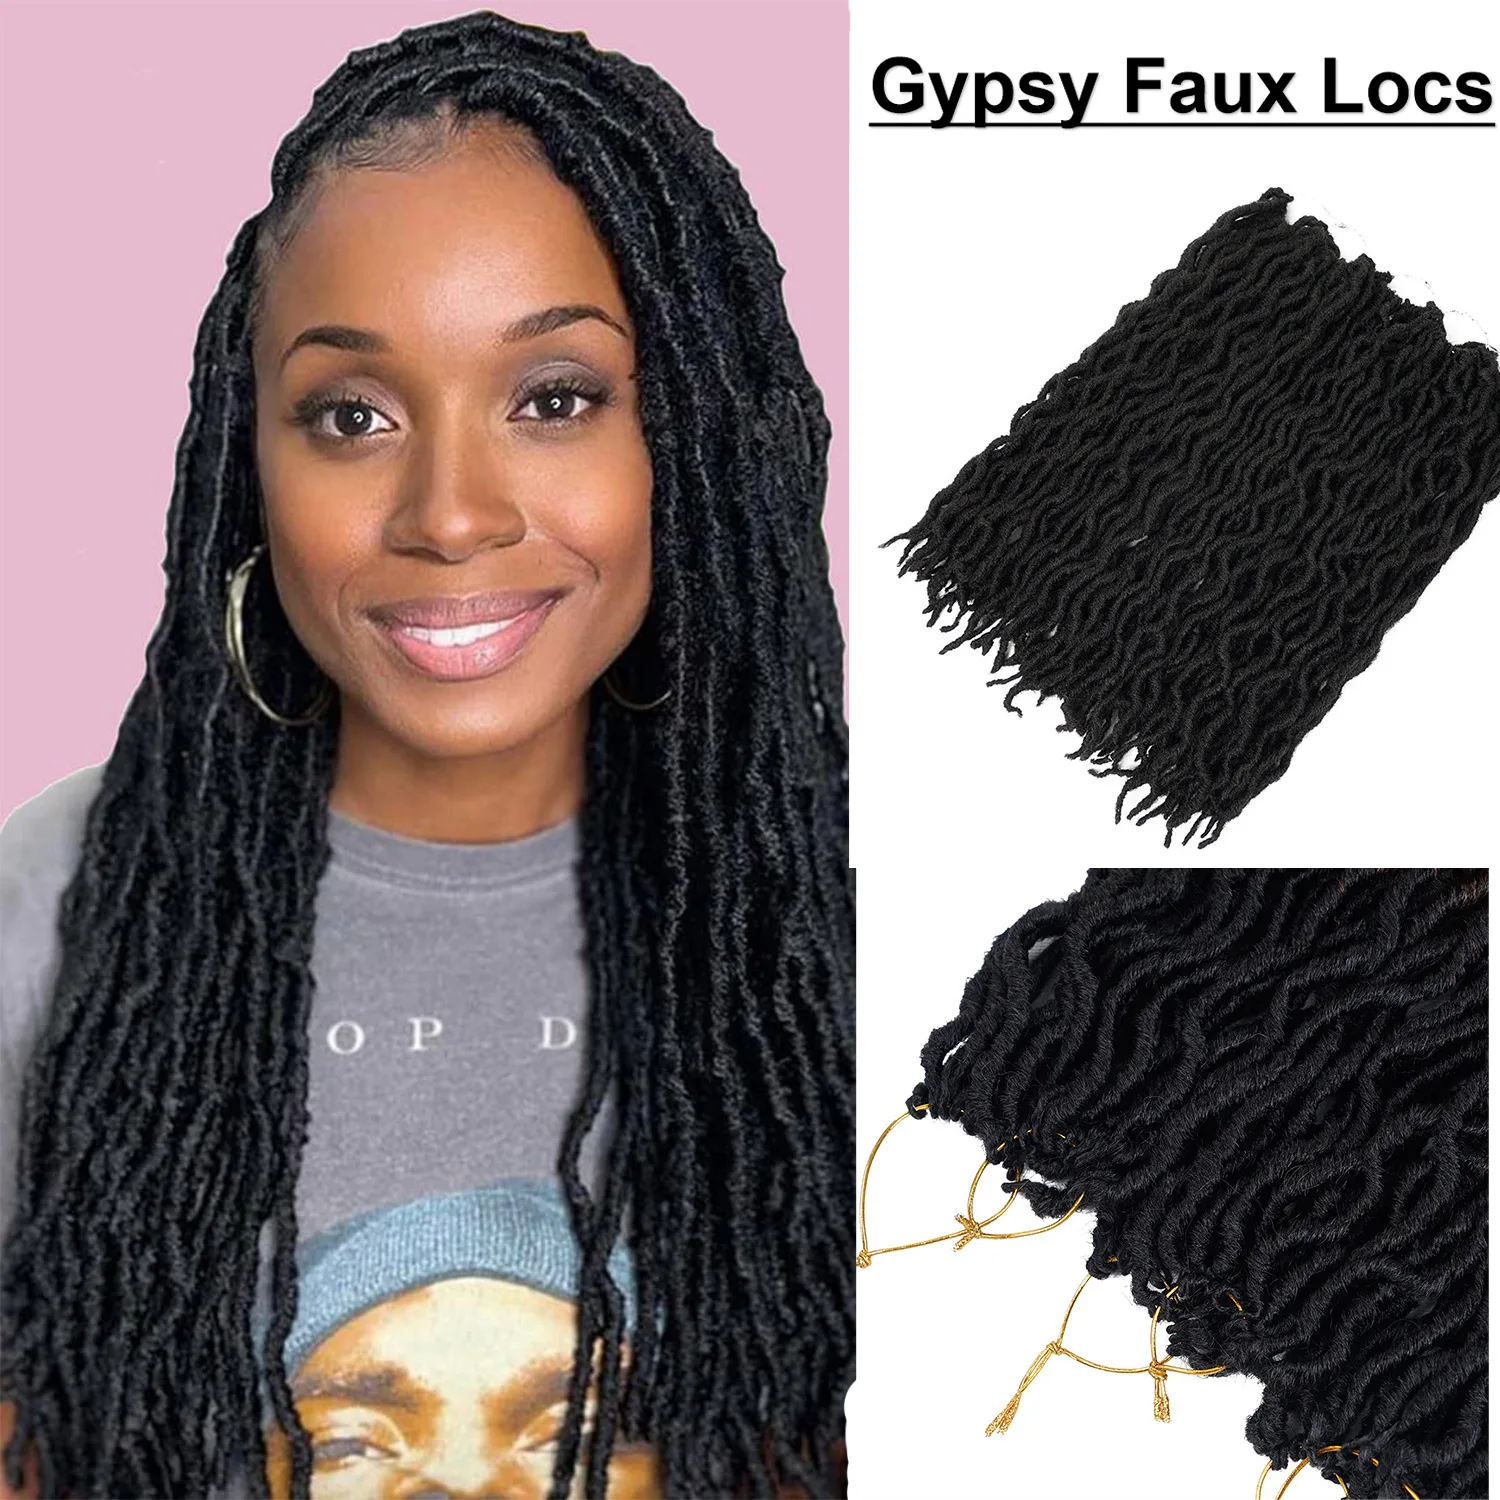 

18Inch Synthetic Faux Locs Crochet Braids Hair Nature Soft Dreadlocks Hair Extensions Ombre Wave Gypsy Locs Braiding Hair